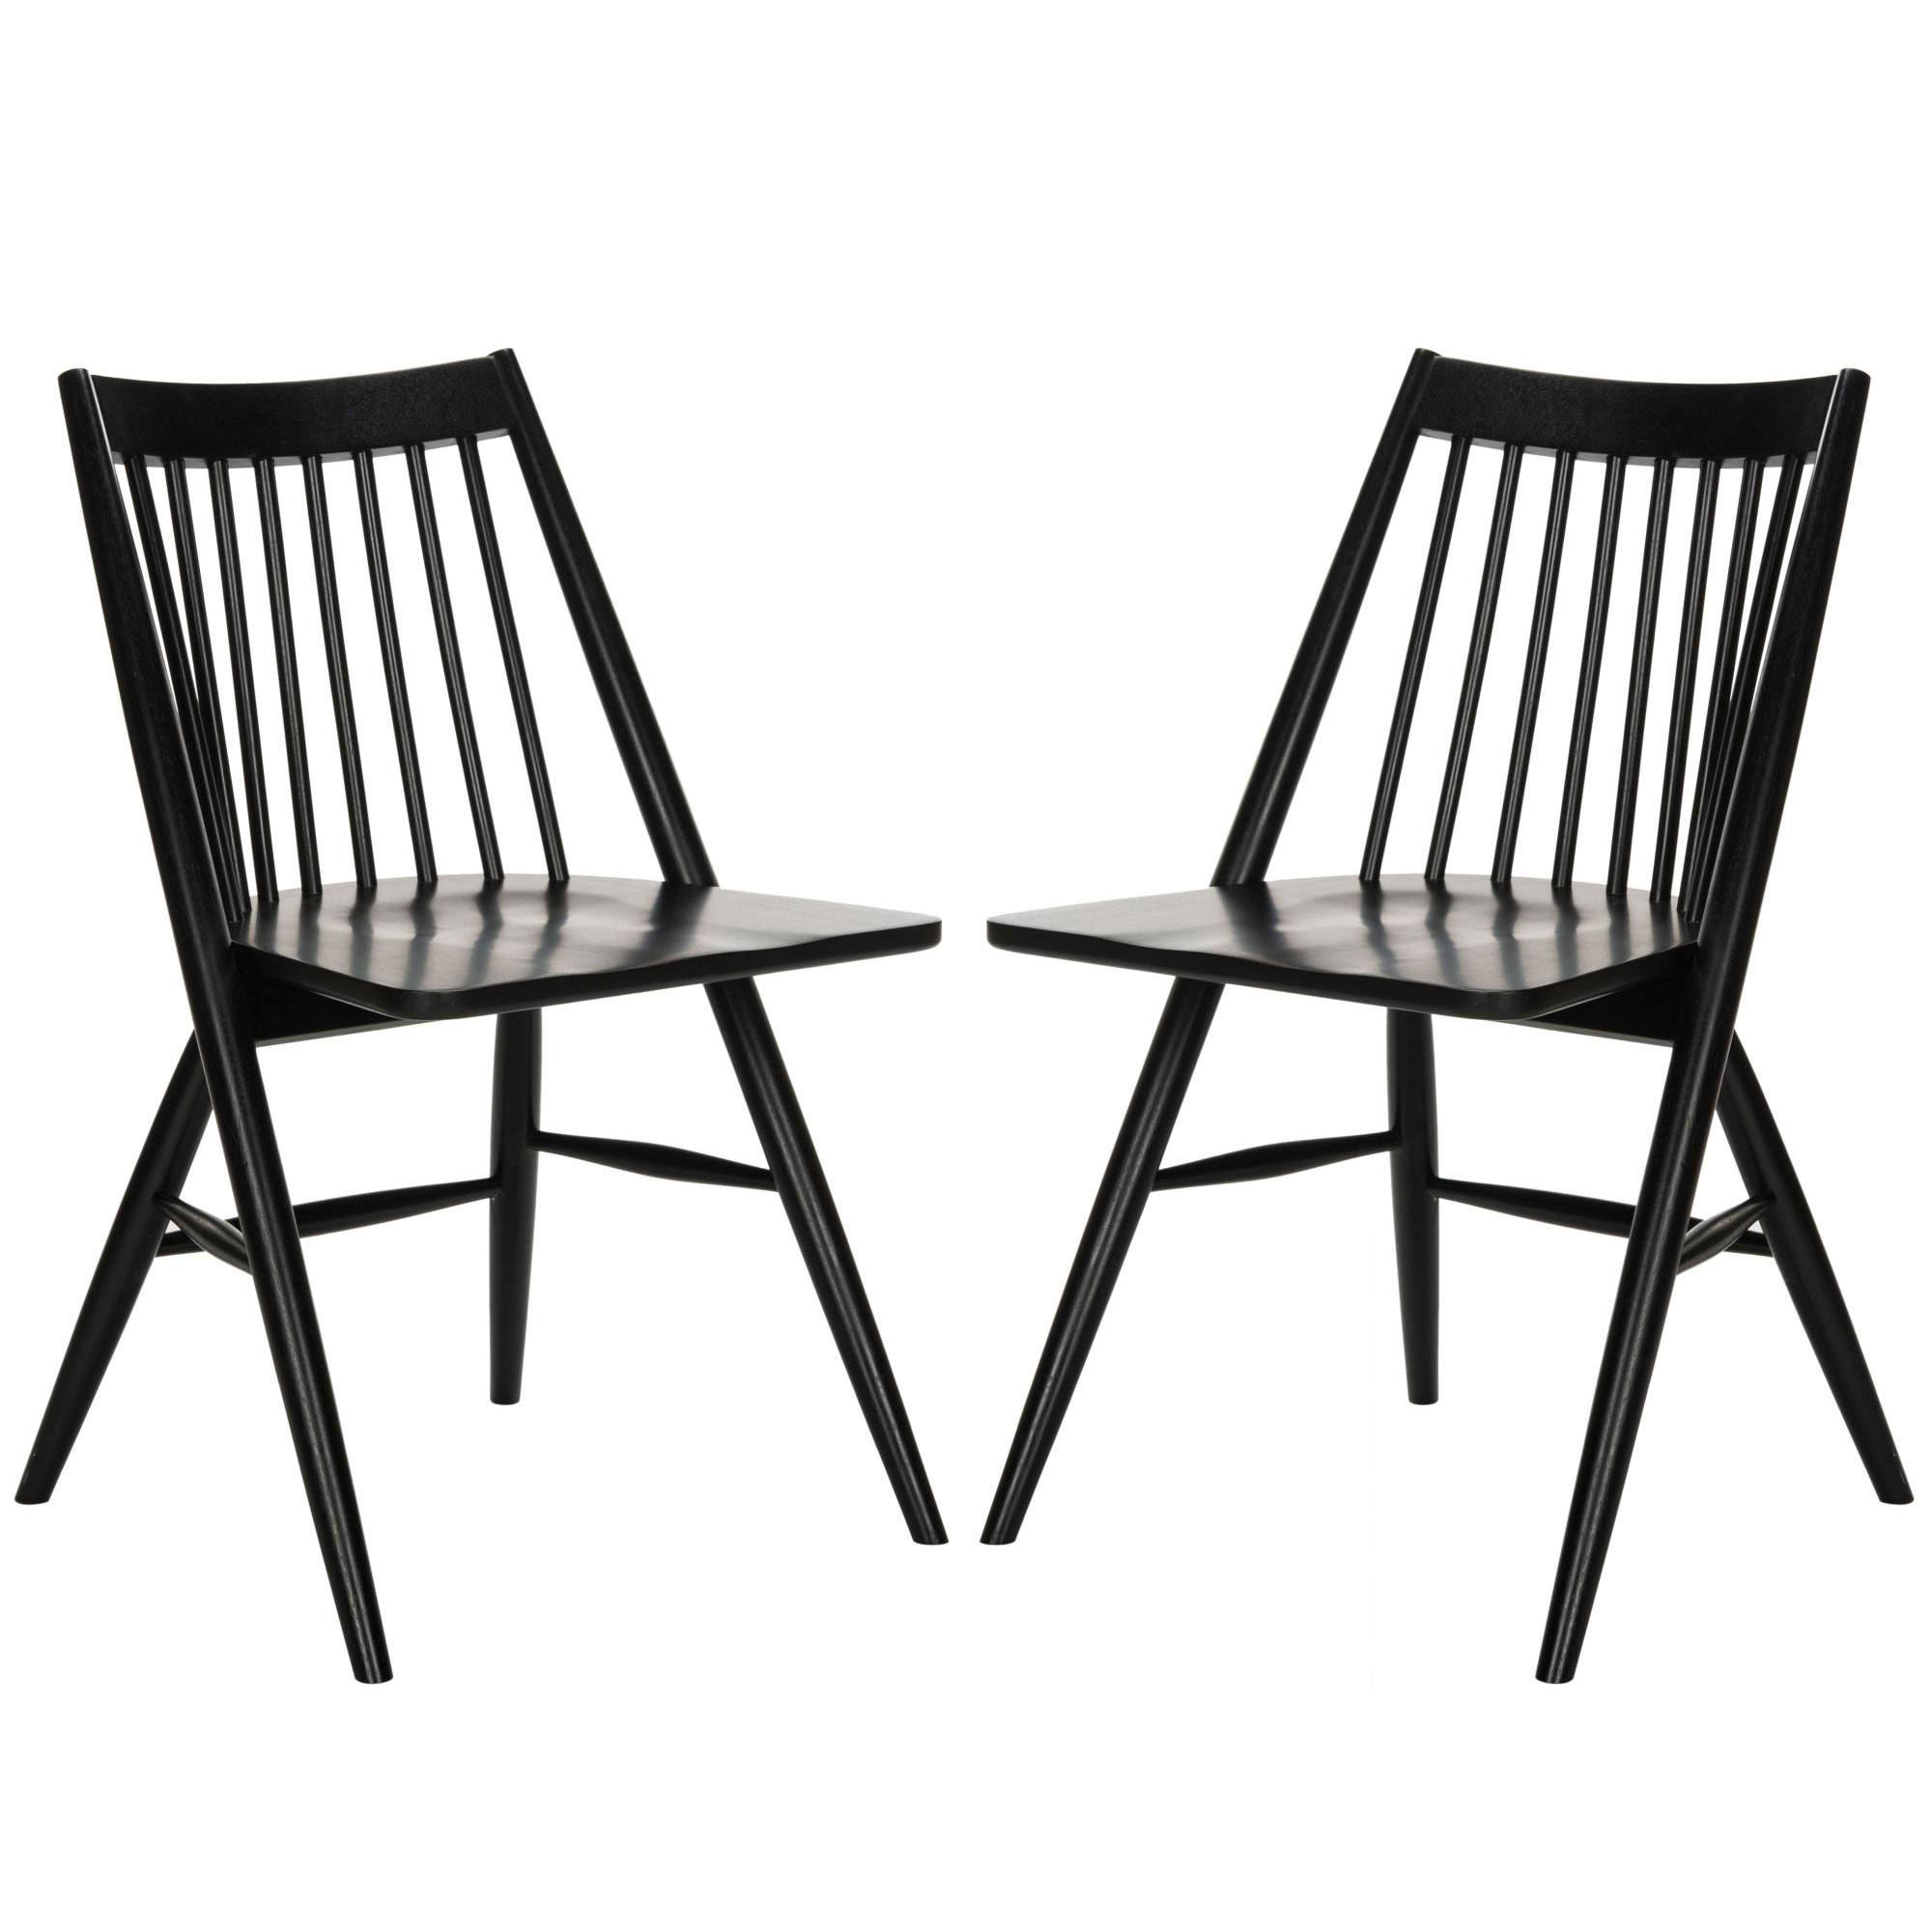 Wren 19"H Spindle Dining Chair Set of 2